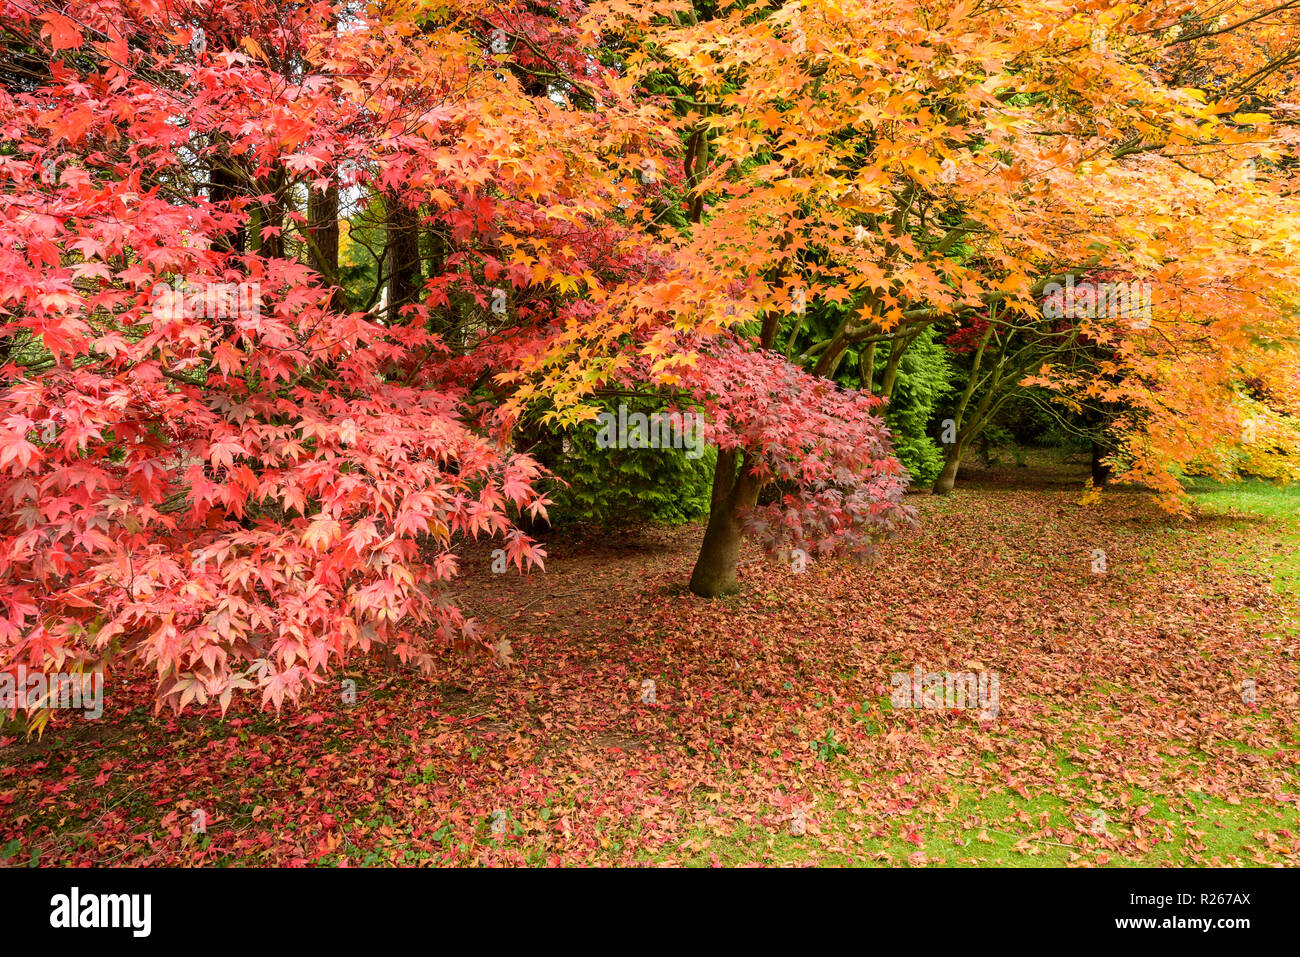 Vibrant & varied autumnal colours seen in parkland where Japanese maples (acers) display deep red & bright orange leaves - Yorkshire, England, UK. Stock Photo